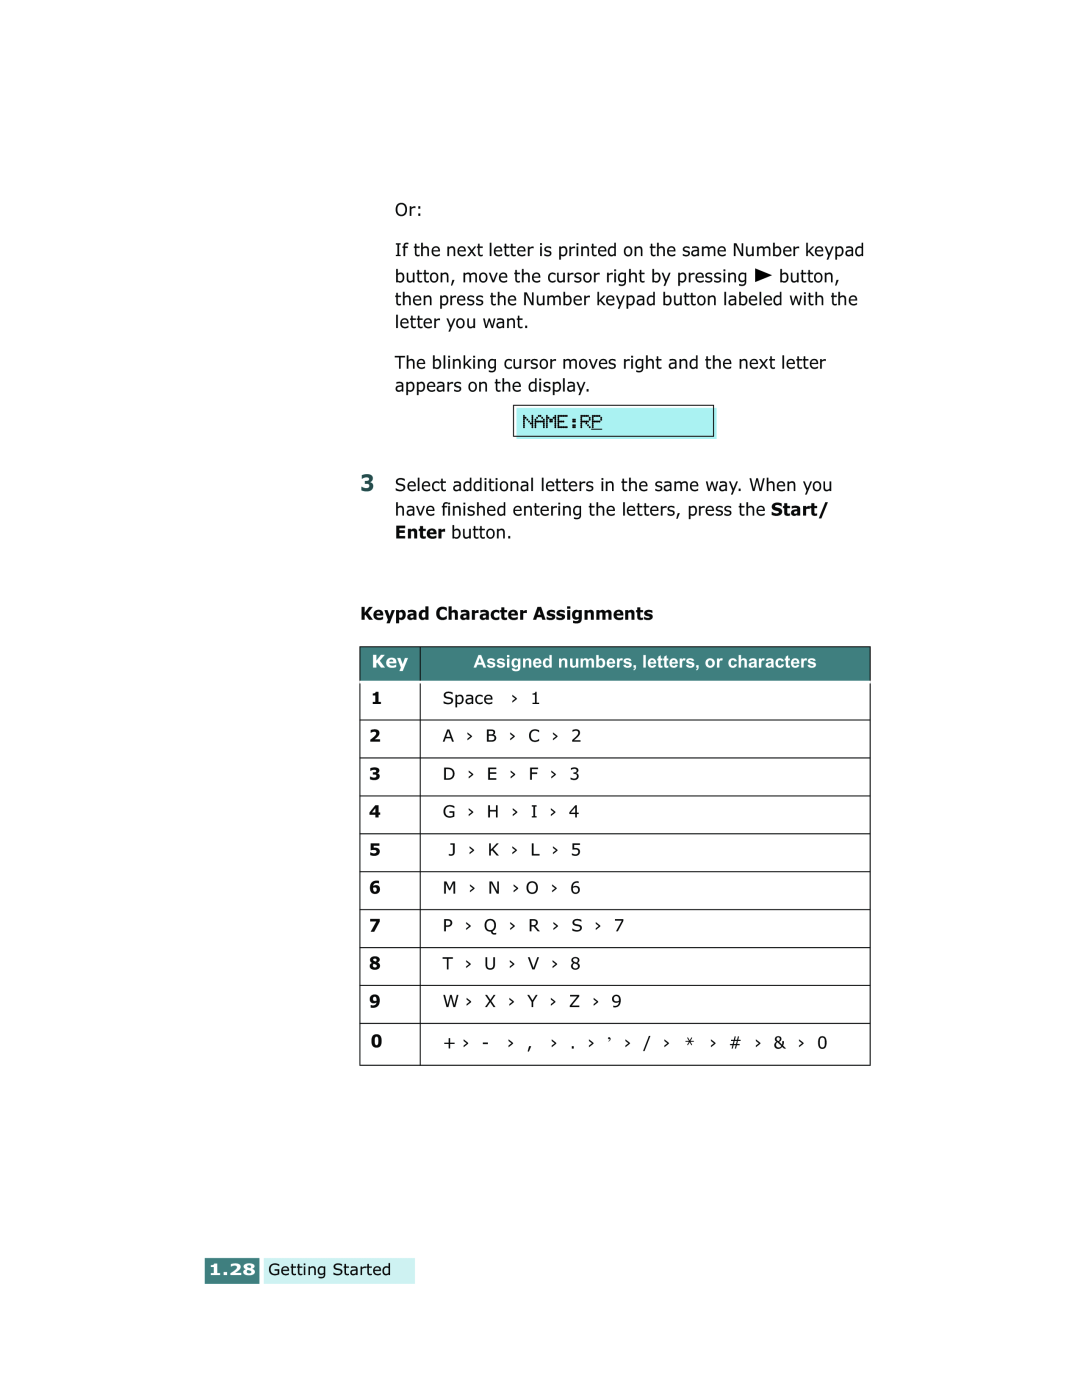 Xerox Pro 580 manual Keypad Character Assignments, Assigned numbers, letters, or characters 